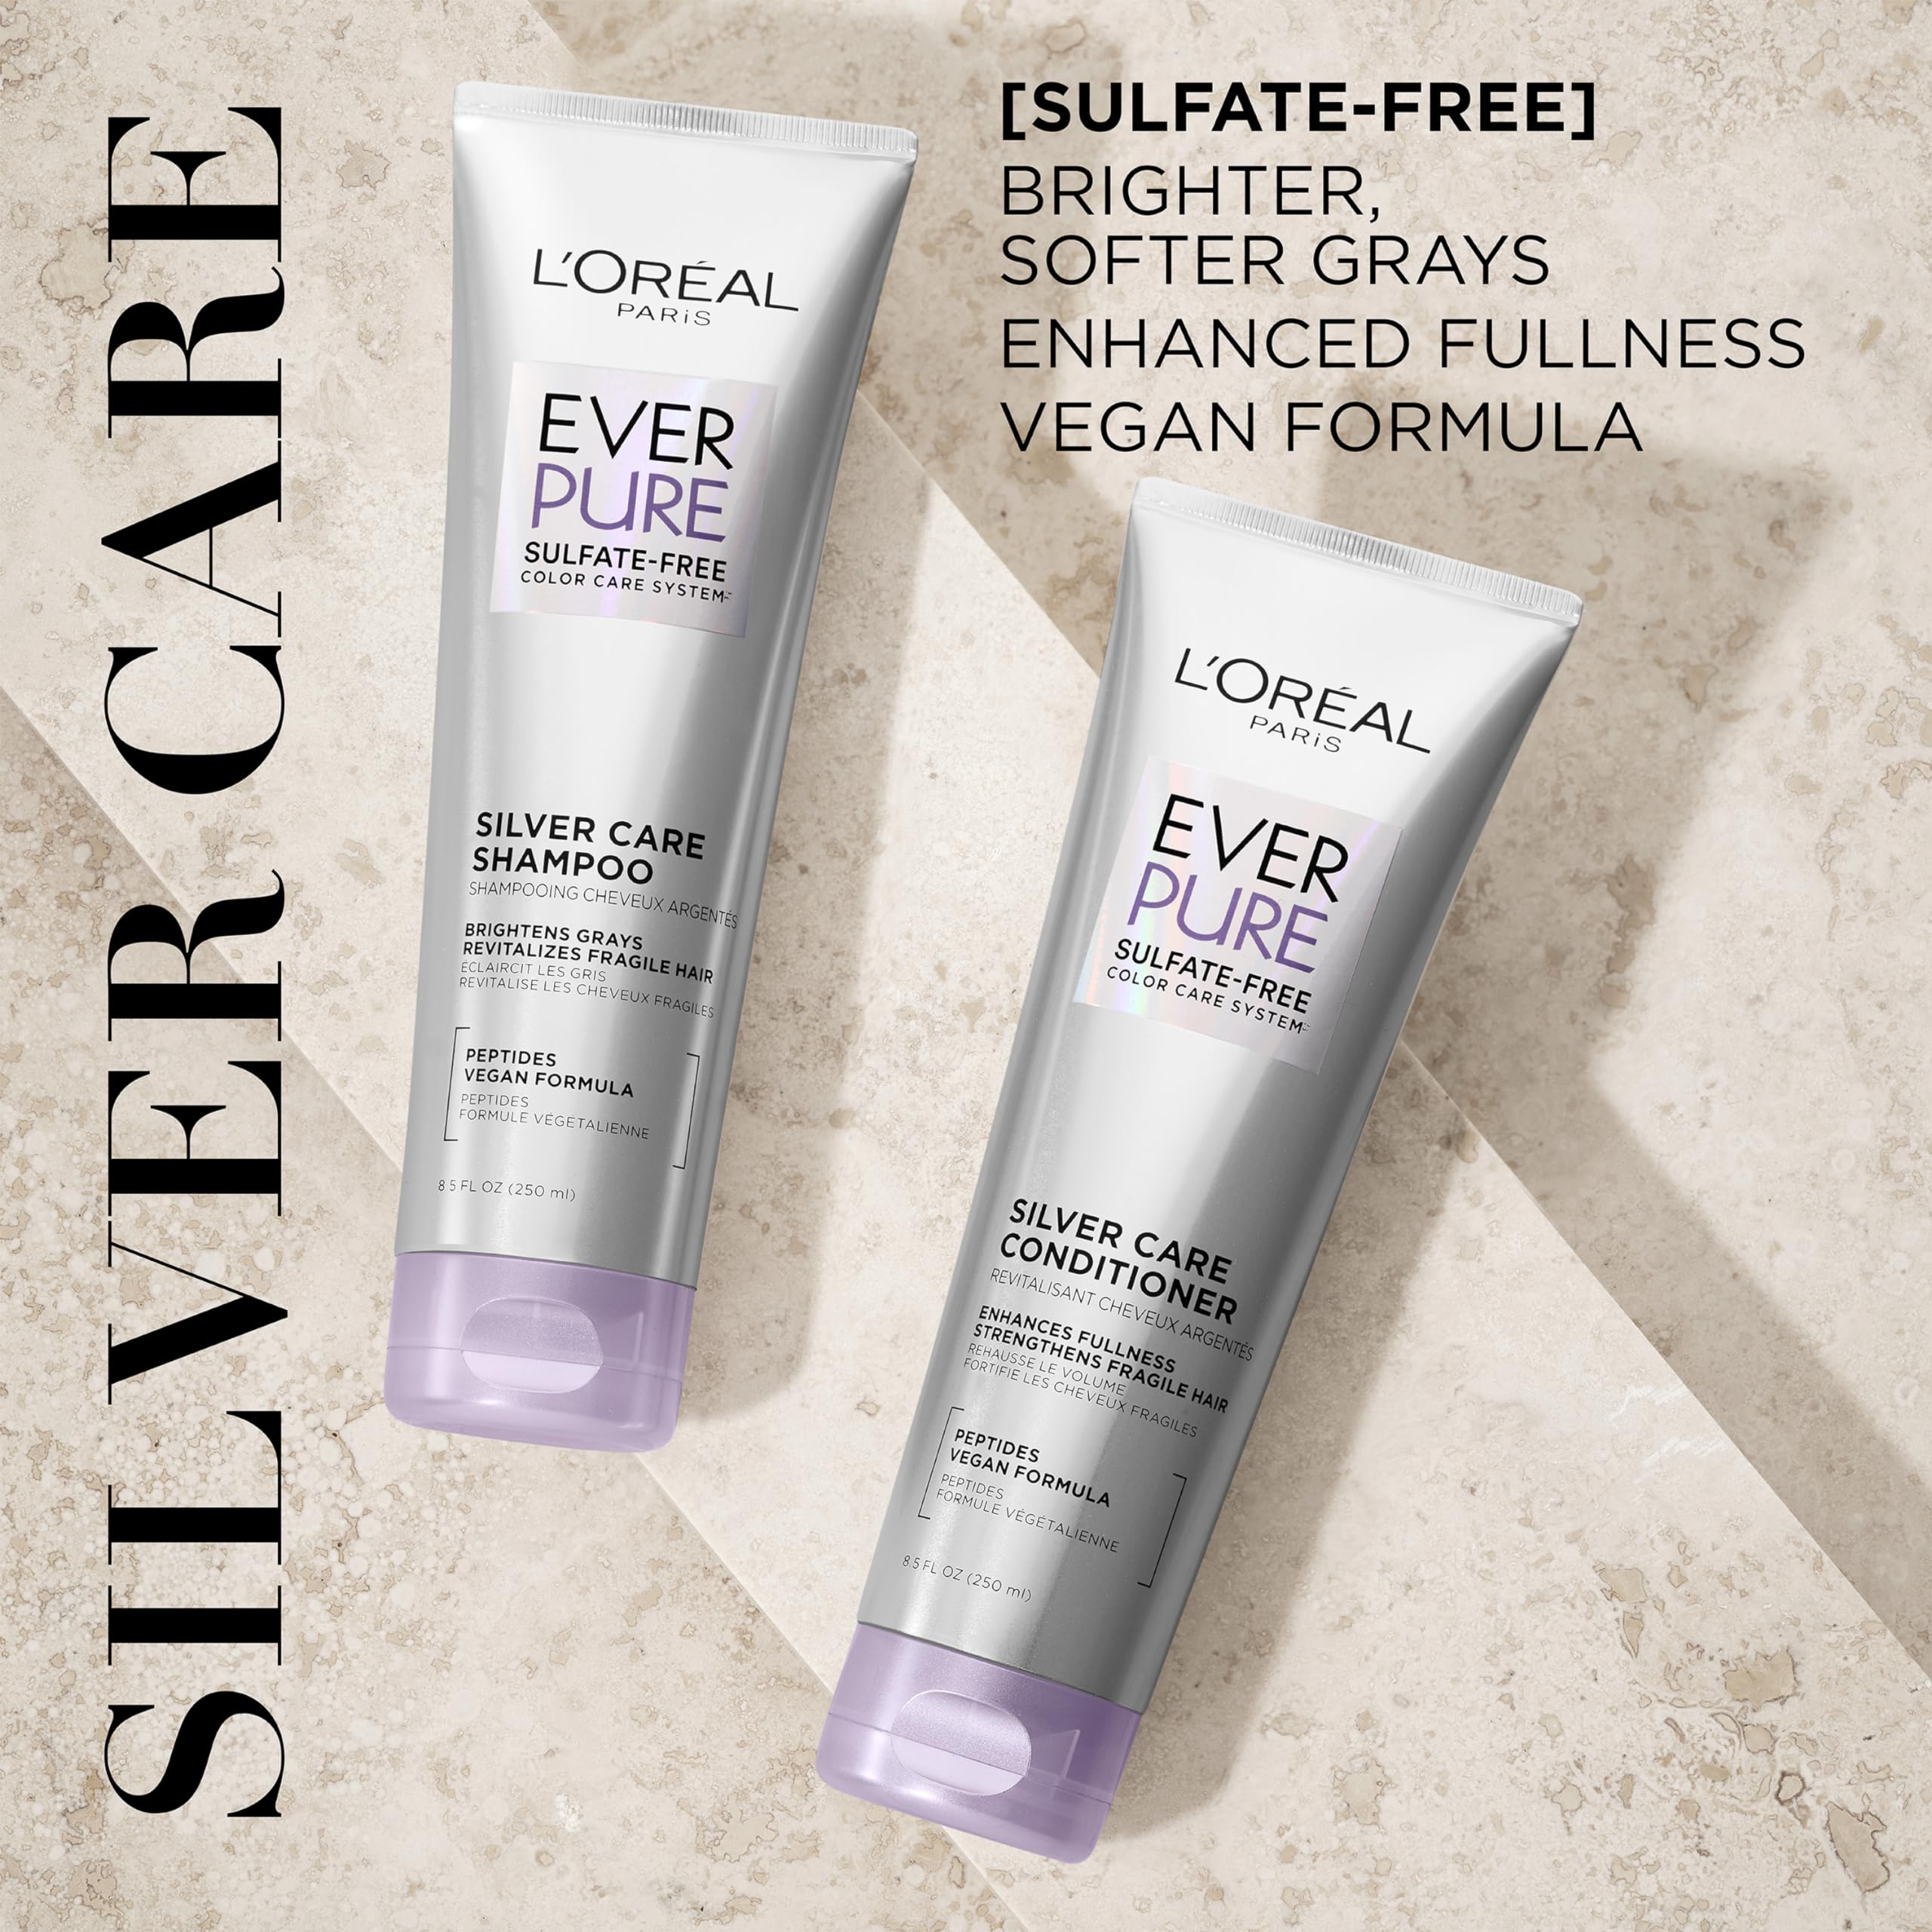 L'Oreal Paris EverPure Silver Care Sulfate Free Conditioner, Brightening and Nourishing Hair Care for Gray and Silver Hair, Vegan Formula with Peptides, 8.5 Fl Oz